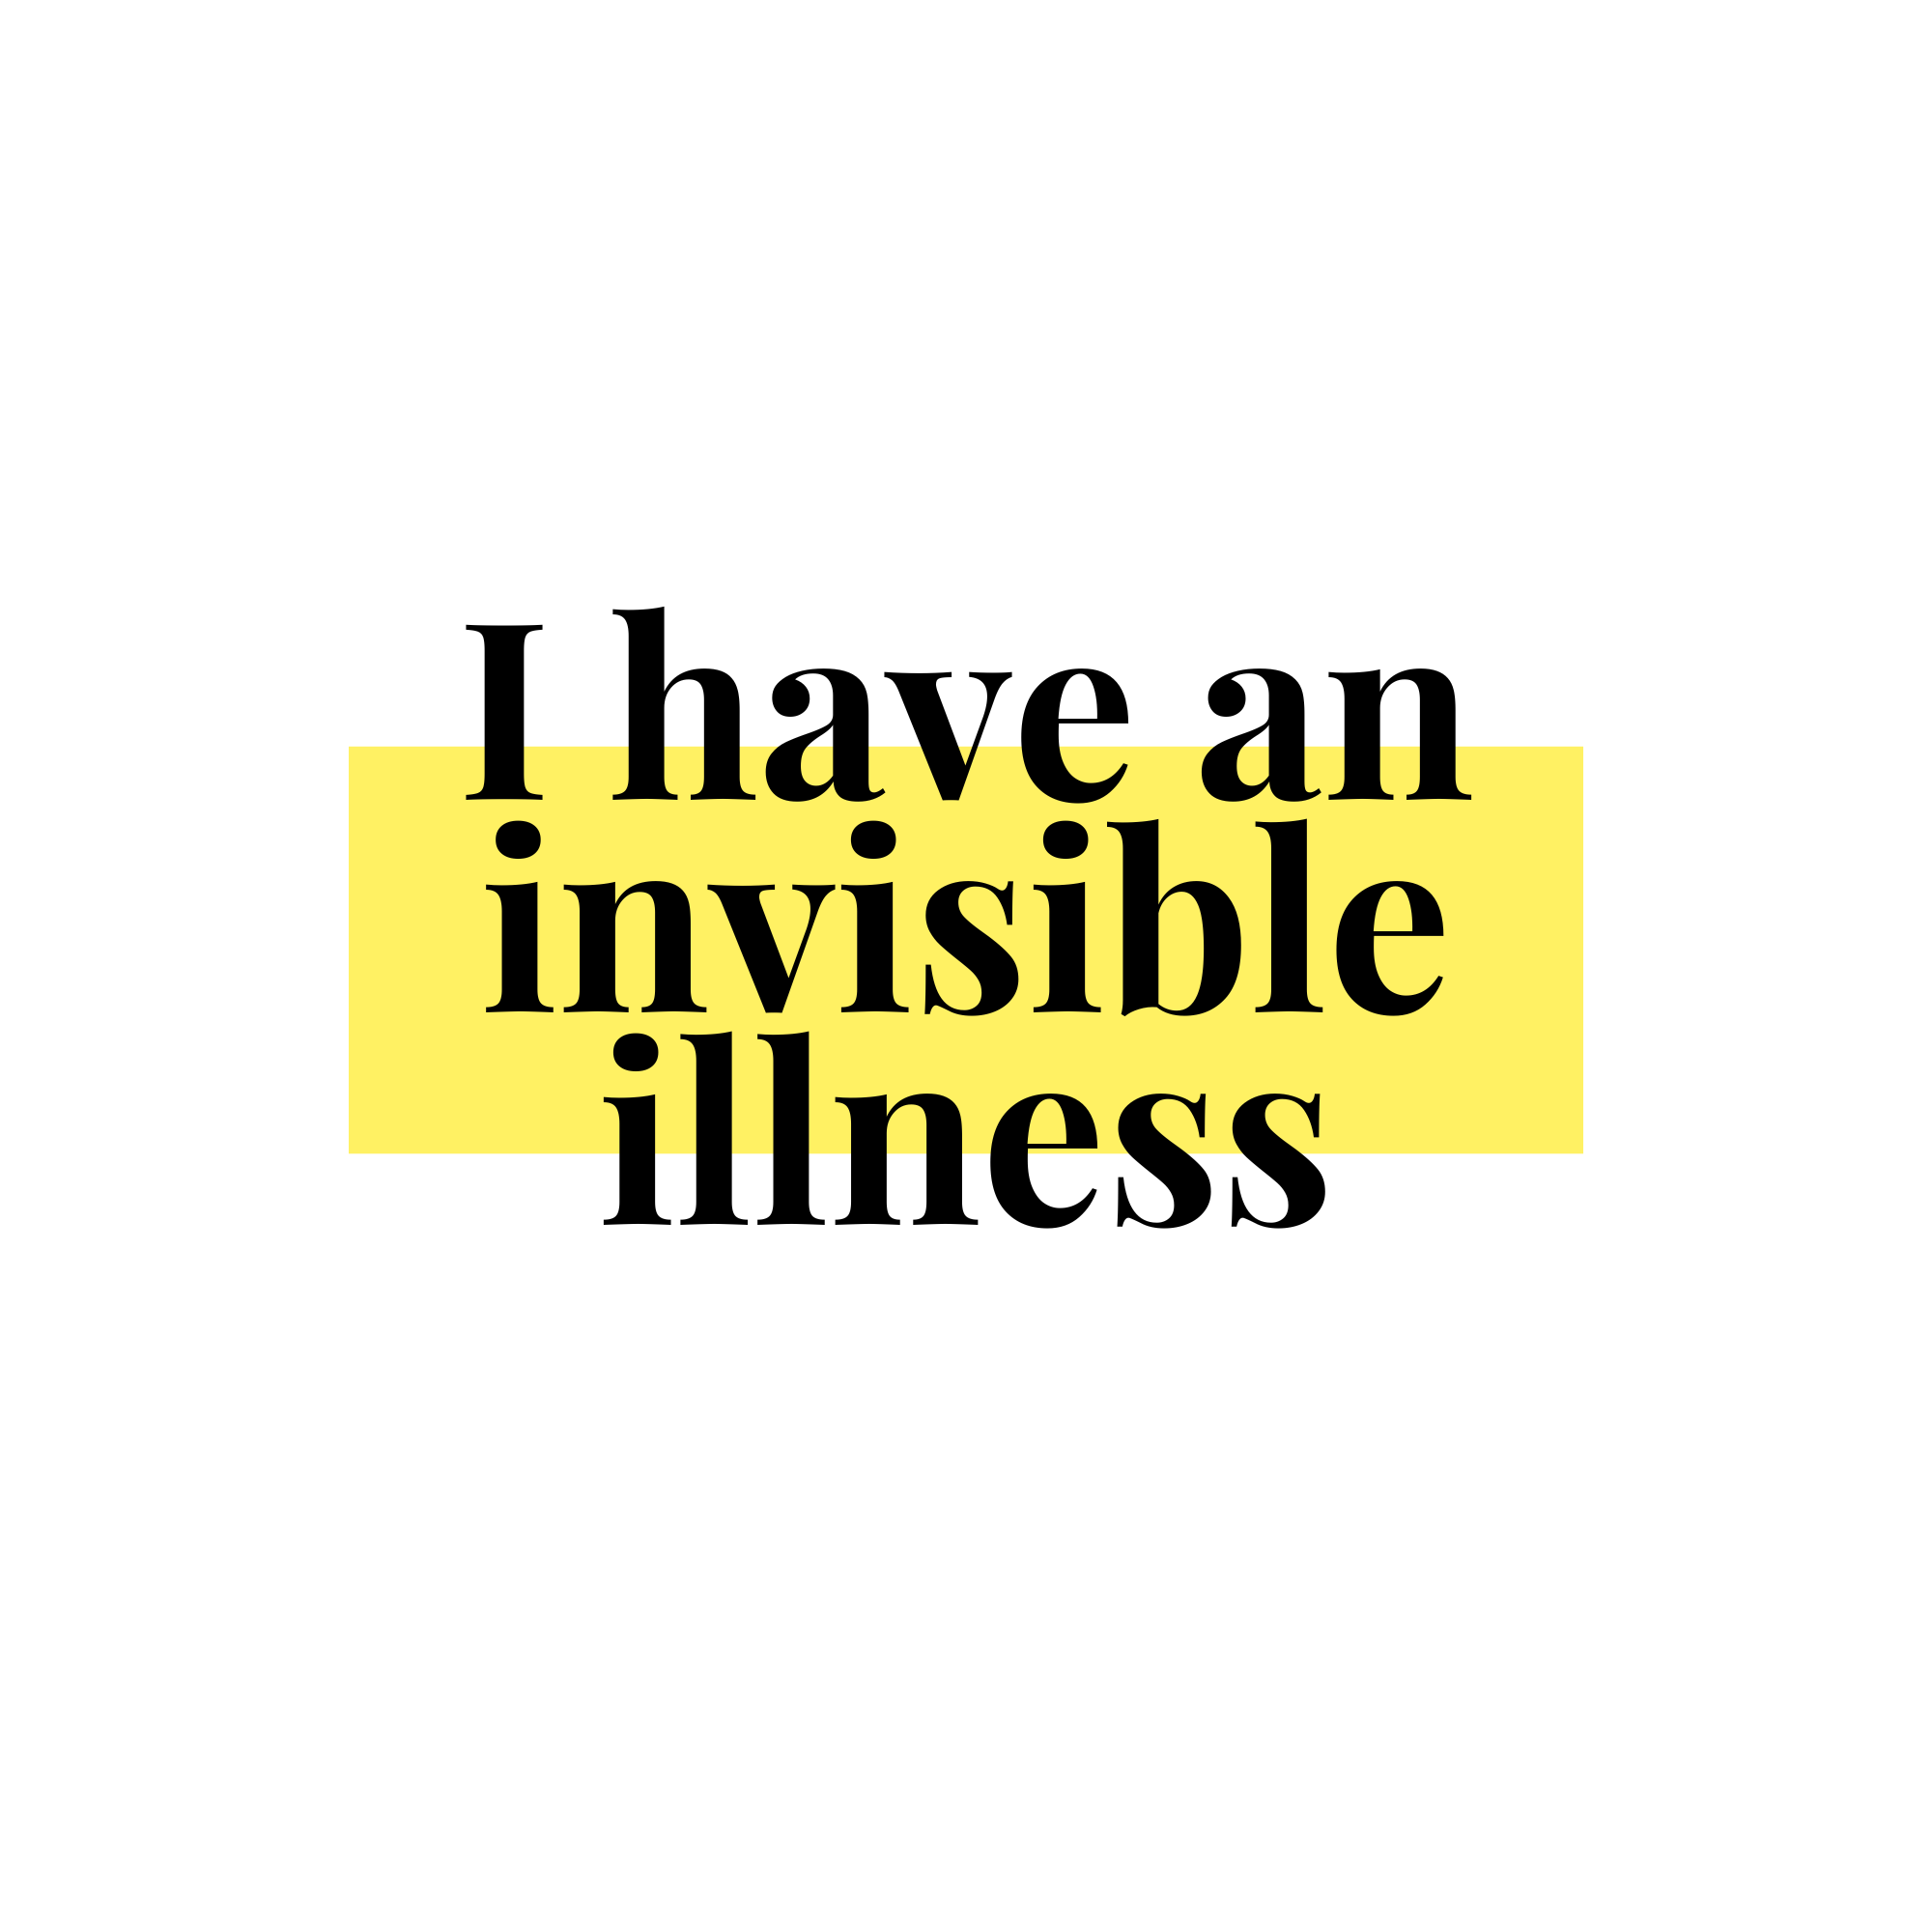 i have an invisible illness